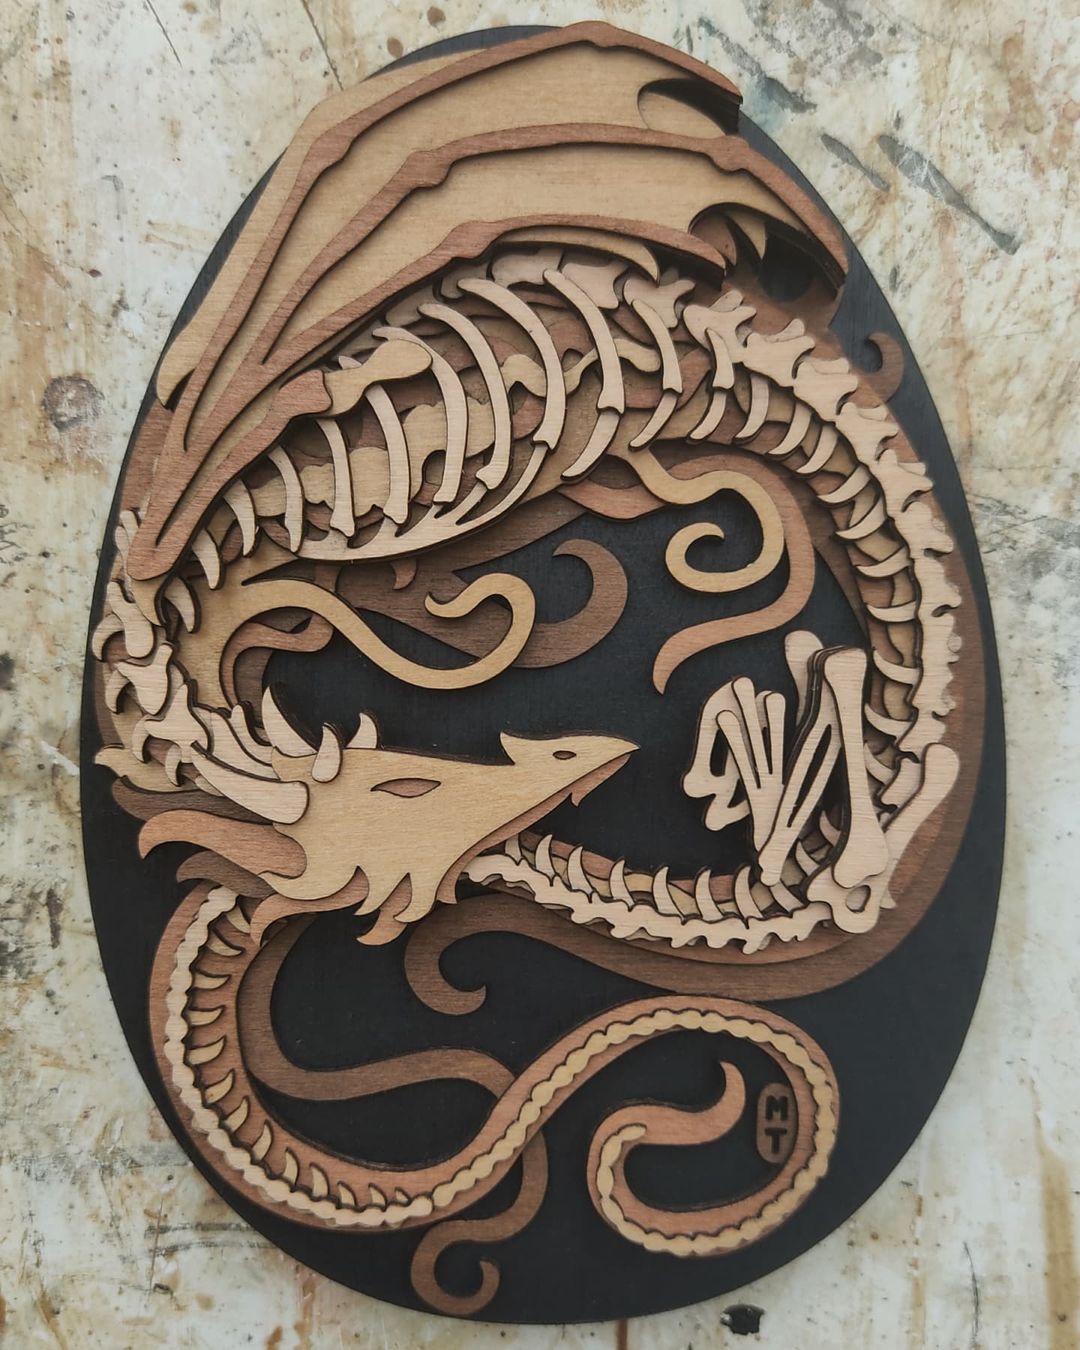 Gorgeous Multi Layered Laser Cut Wood Illustrations By Martin Tomsky 13